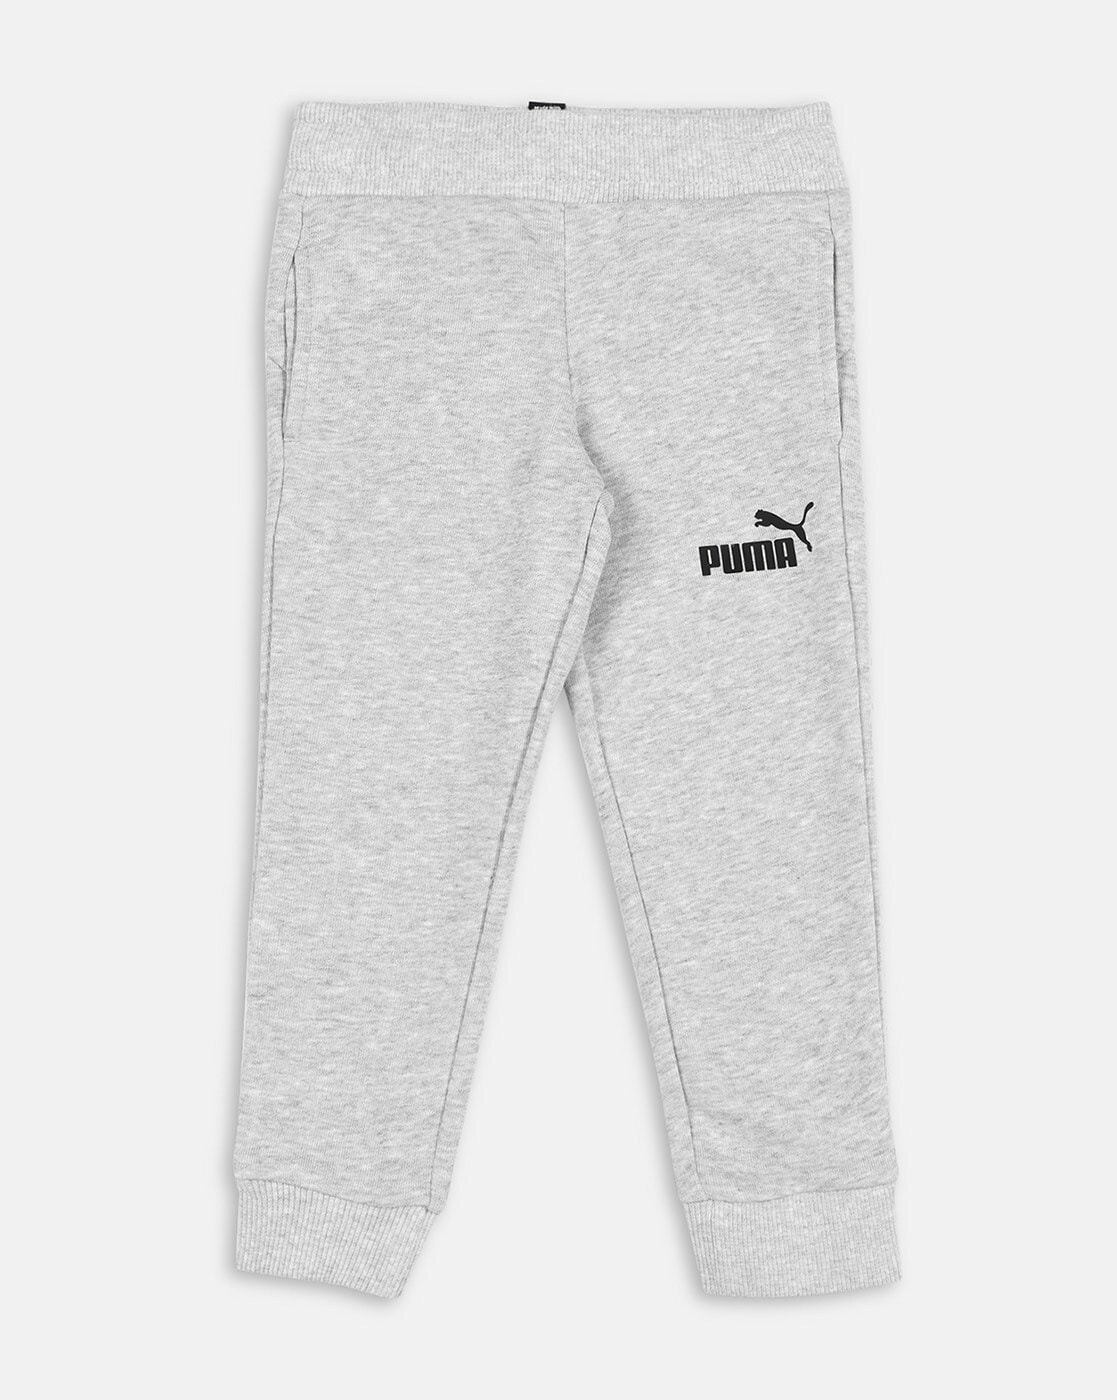 Men's PUMA Knitted Slim Fit Sweat Pants in Gray size S | PUMA | Shaheen  Bagh | New Delhi